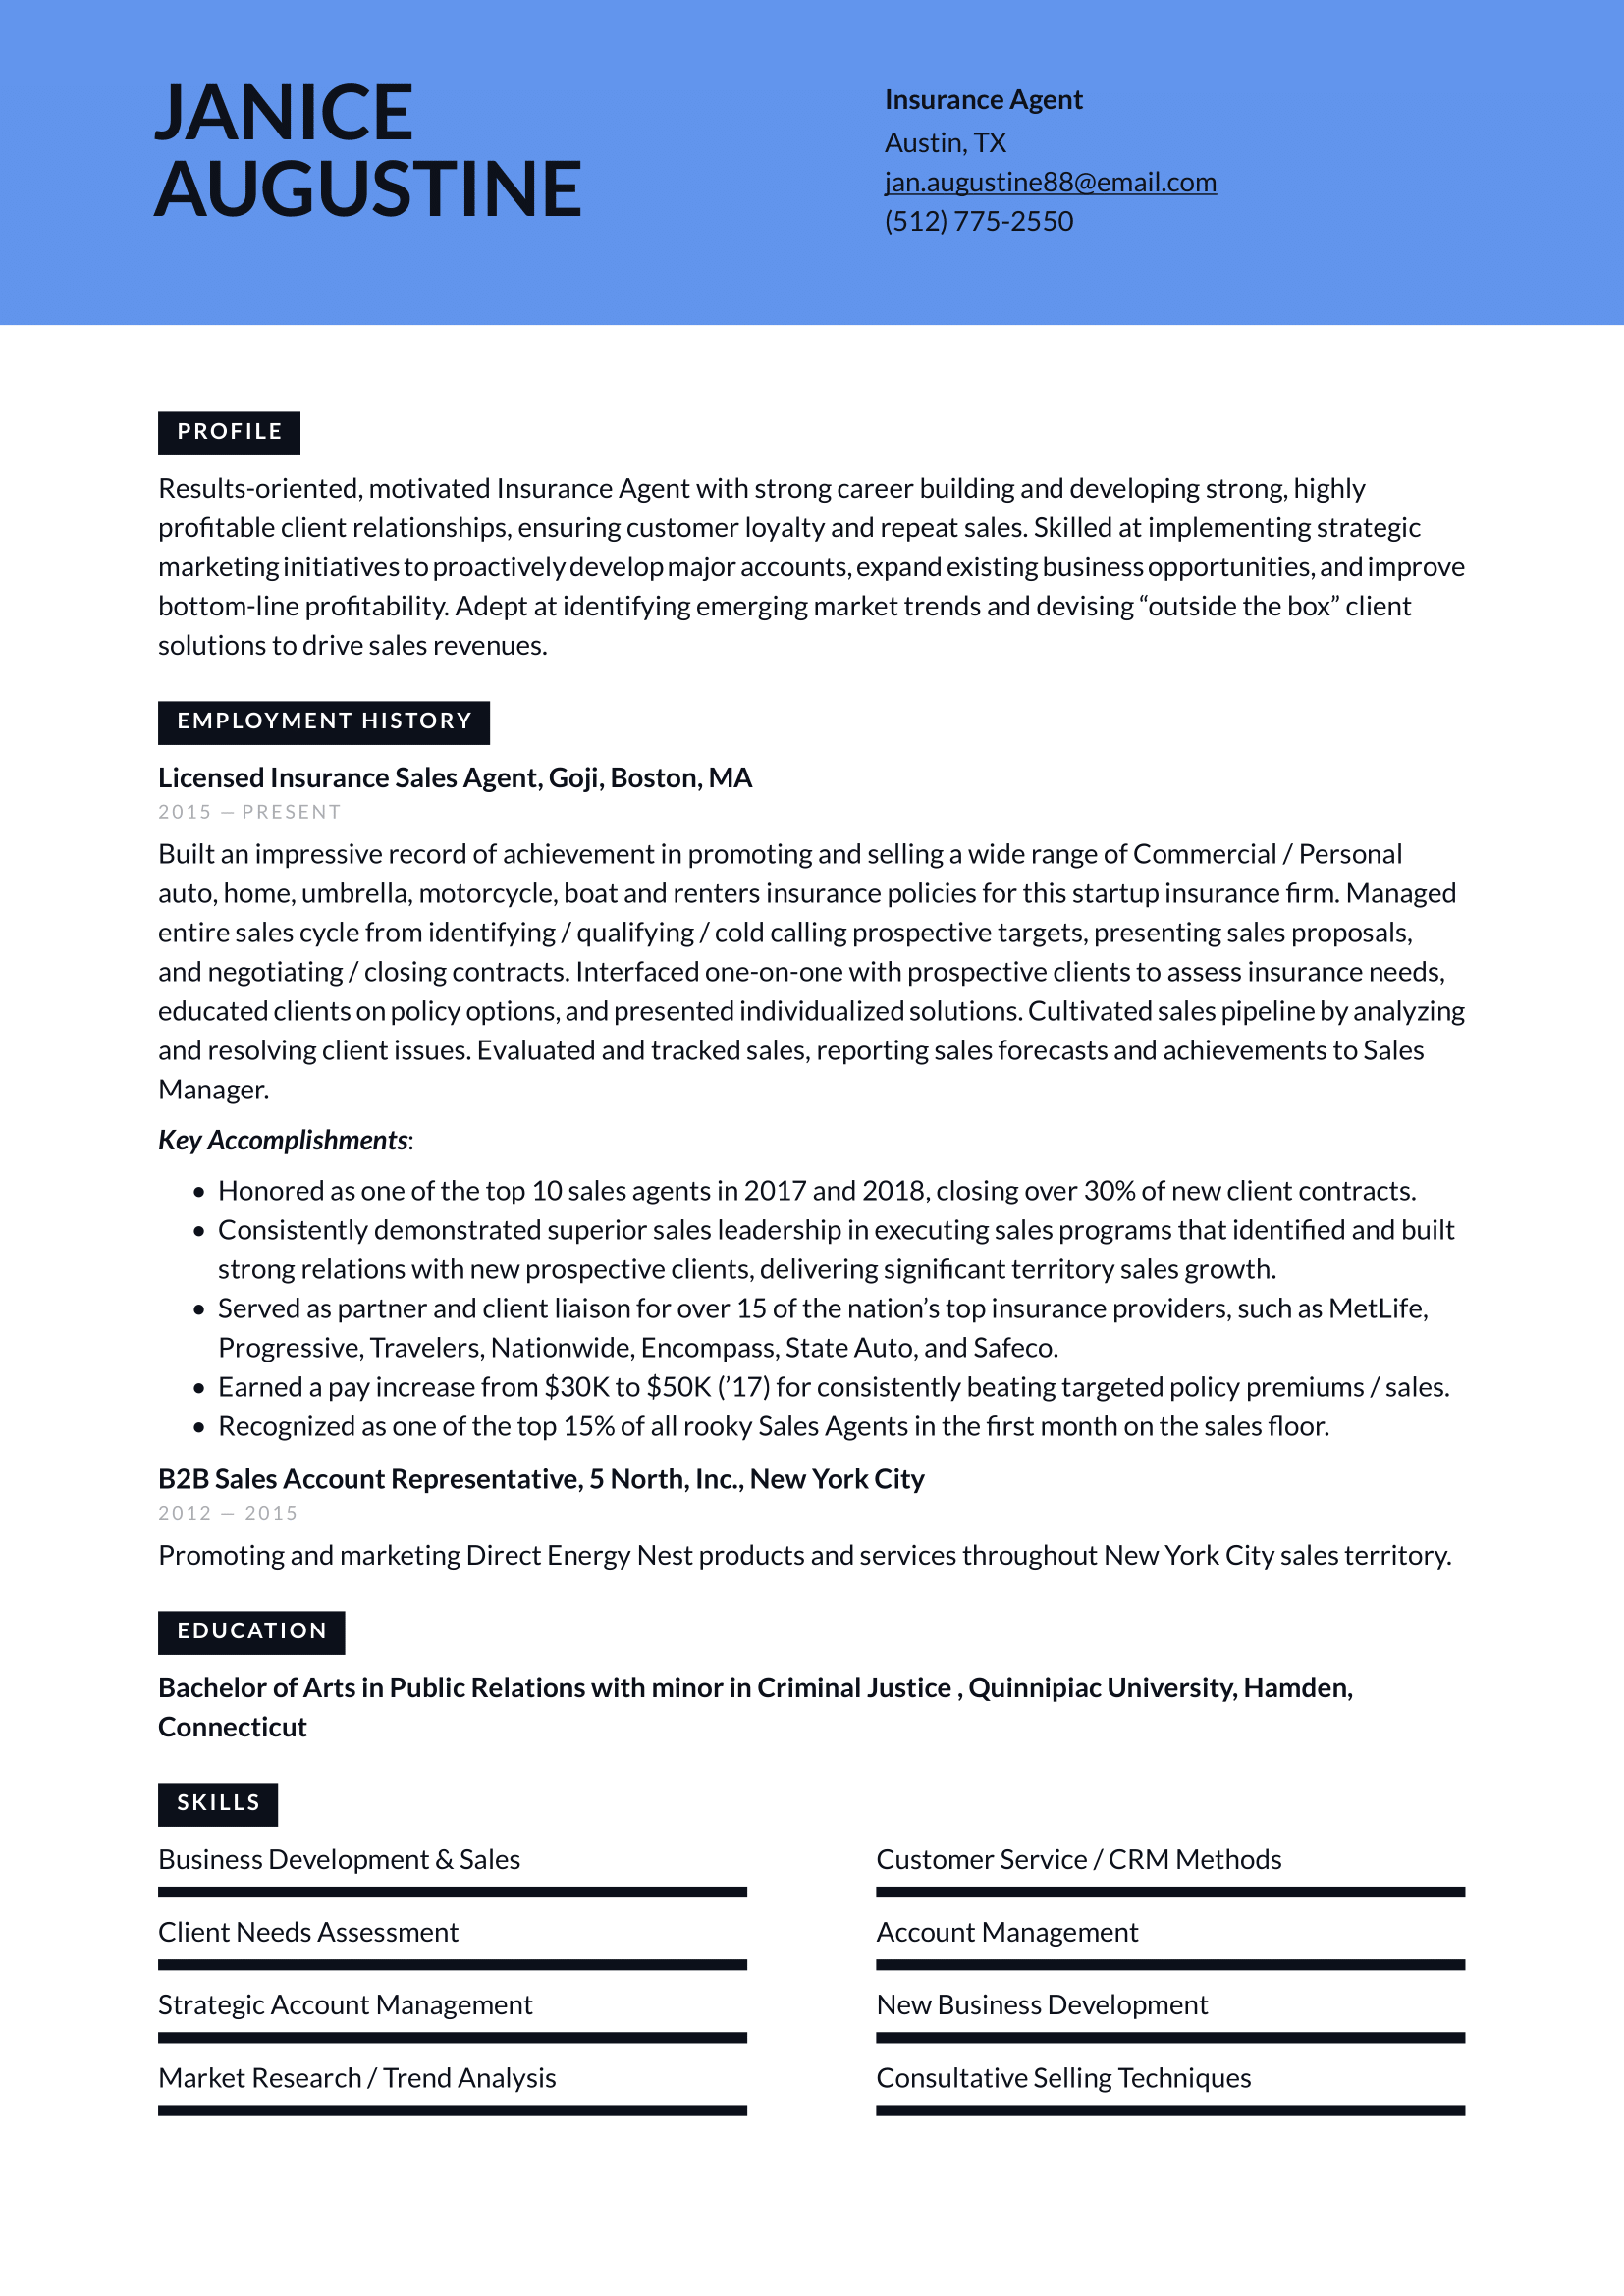 Insurance_Agent-Resume-example.png